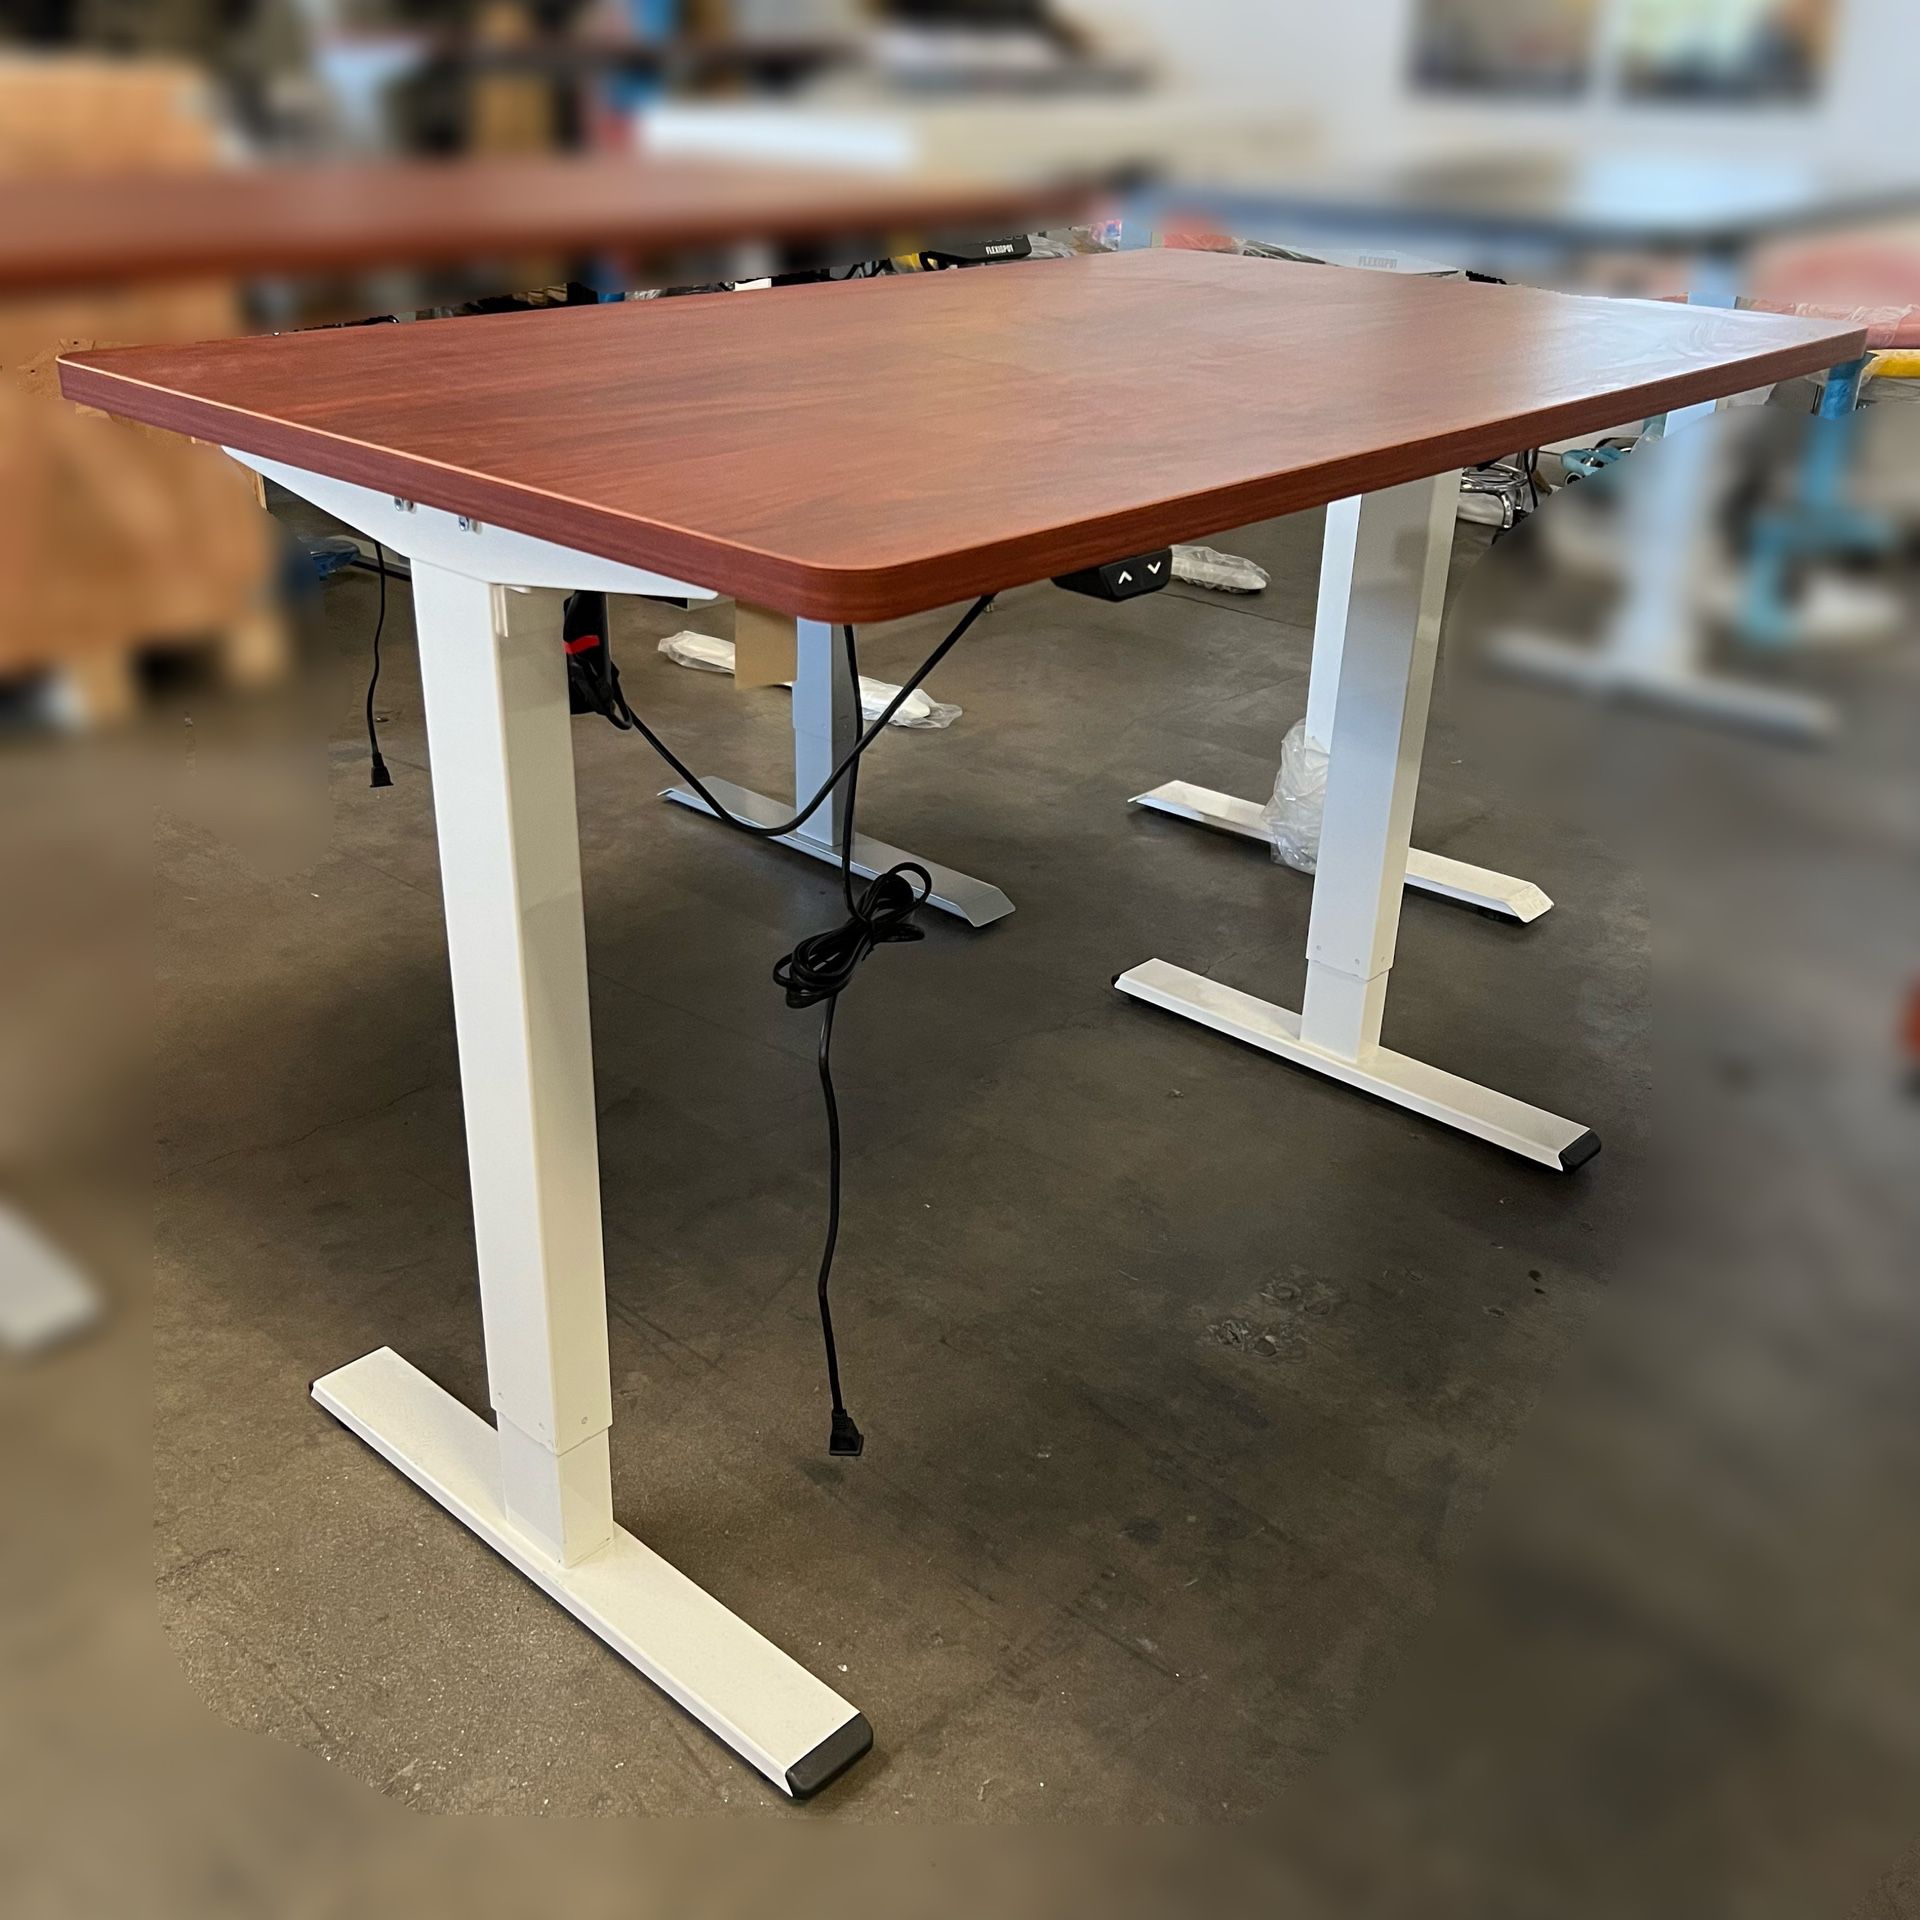 Mahogany Electric Stand Up Desk, Height Adjustable Office Desk, Rising Study Computer Table (READ DESCRIPTION) 